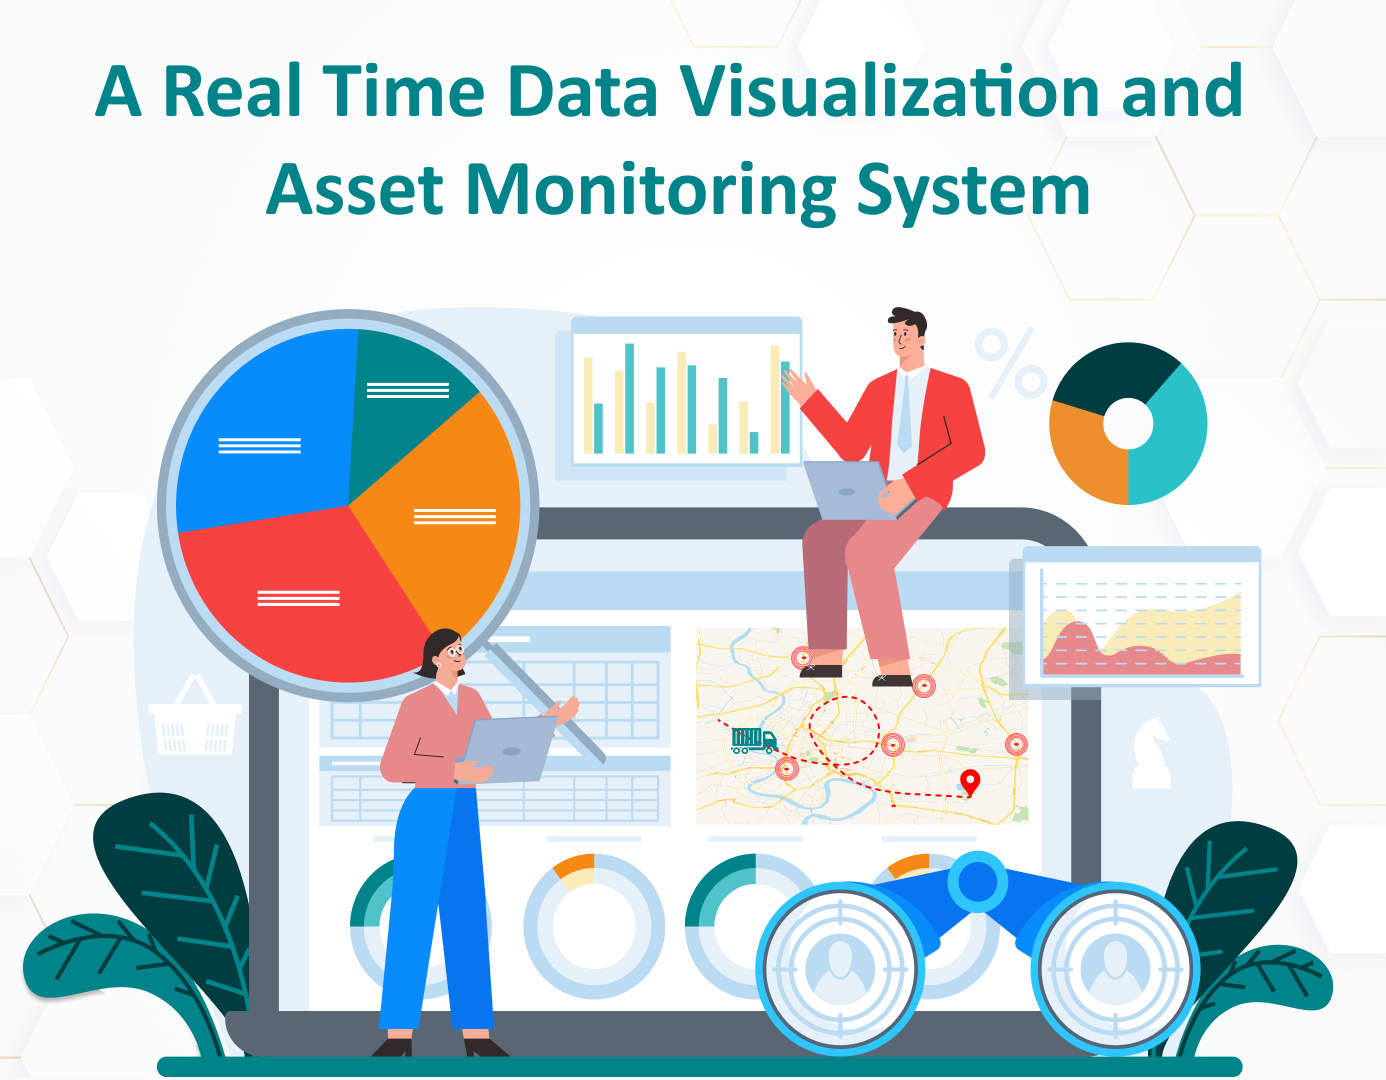 Real-time data visualization and asset monitoring system, empowering businesses with live insights and proactive monitoring capabilities